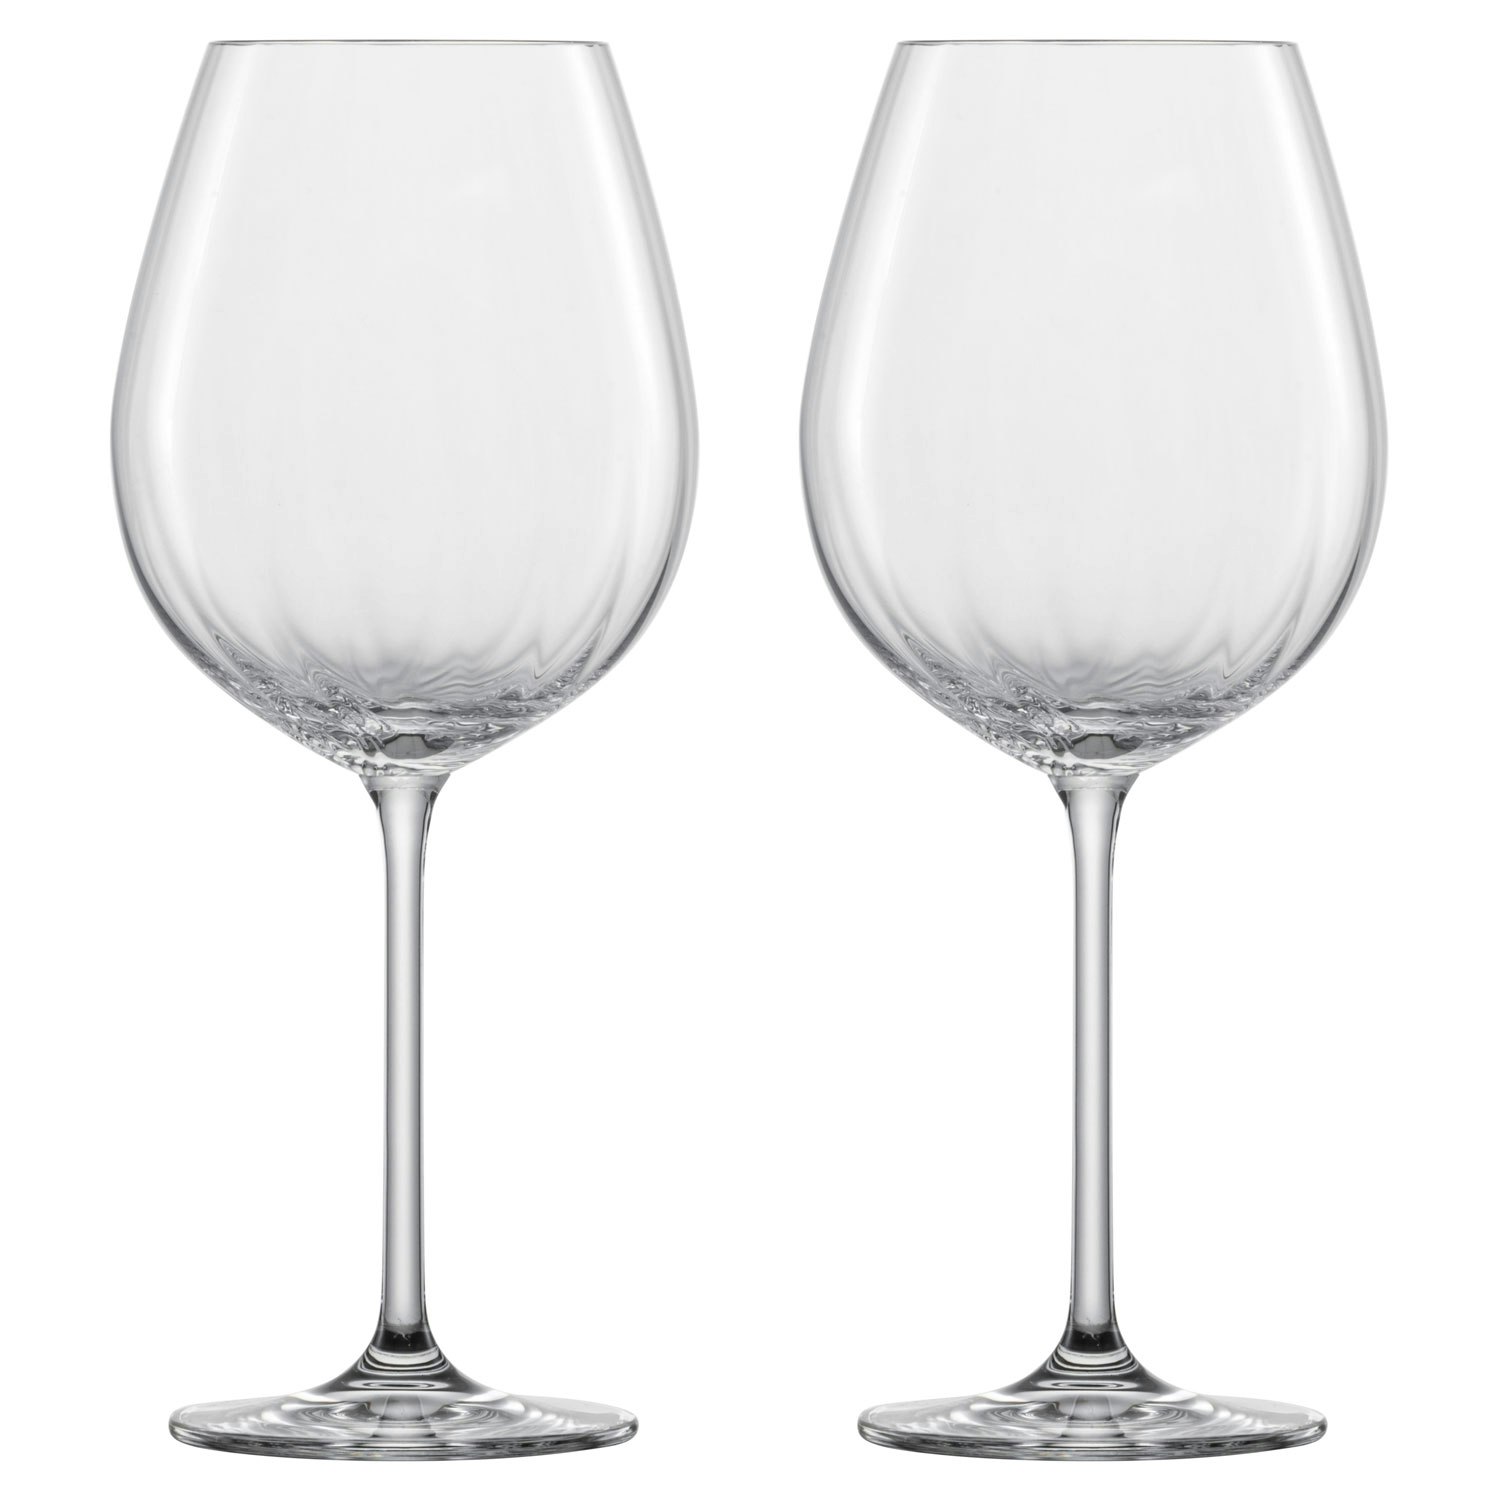 https://royaldesign.com/image/2/zwiesel-prizma-red-wine-glass-61-cl-2-pack-0